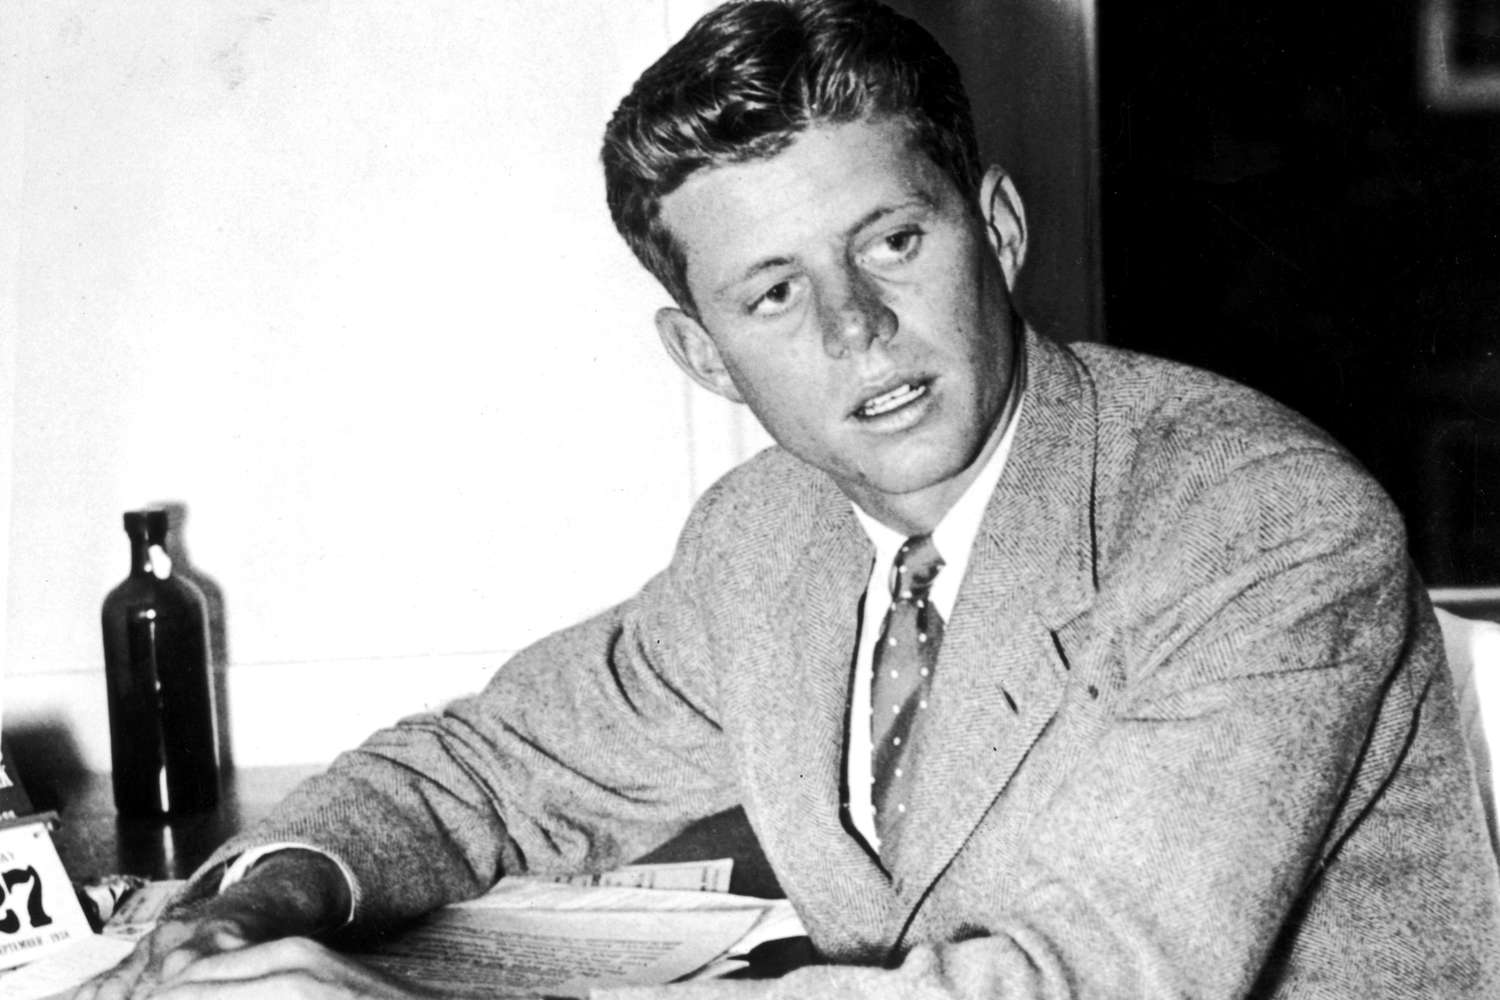 Kennedy’s youth: the man before he became the President